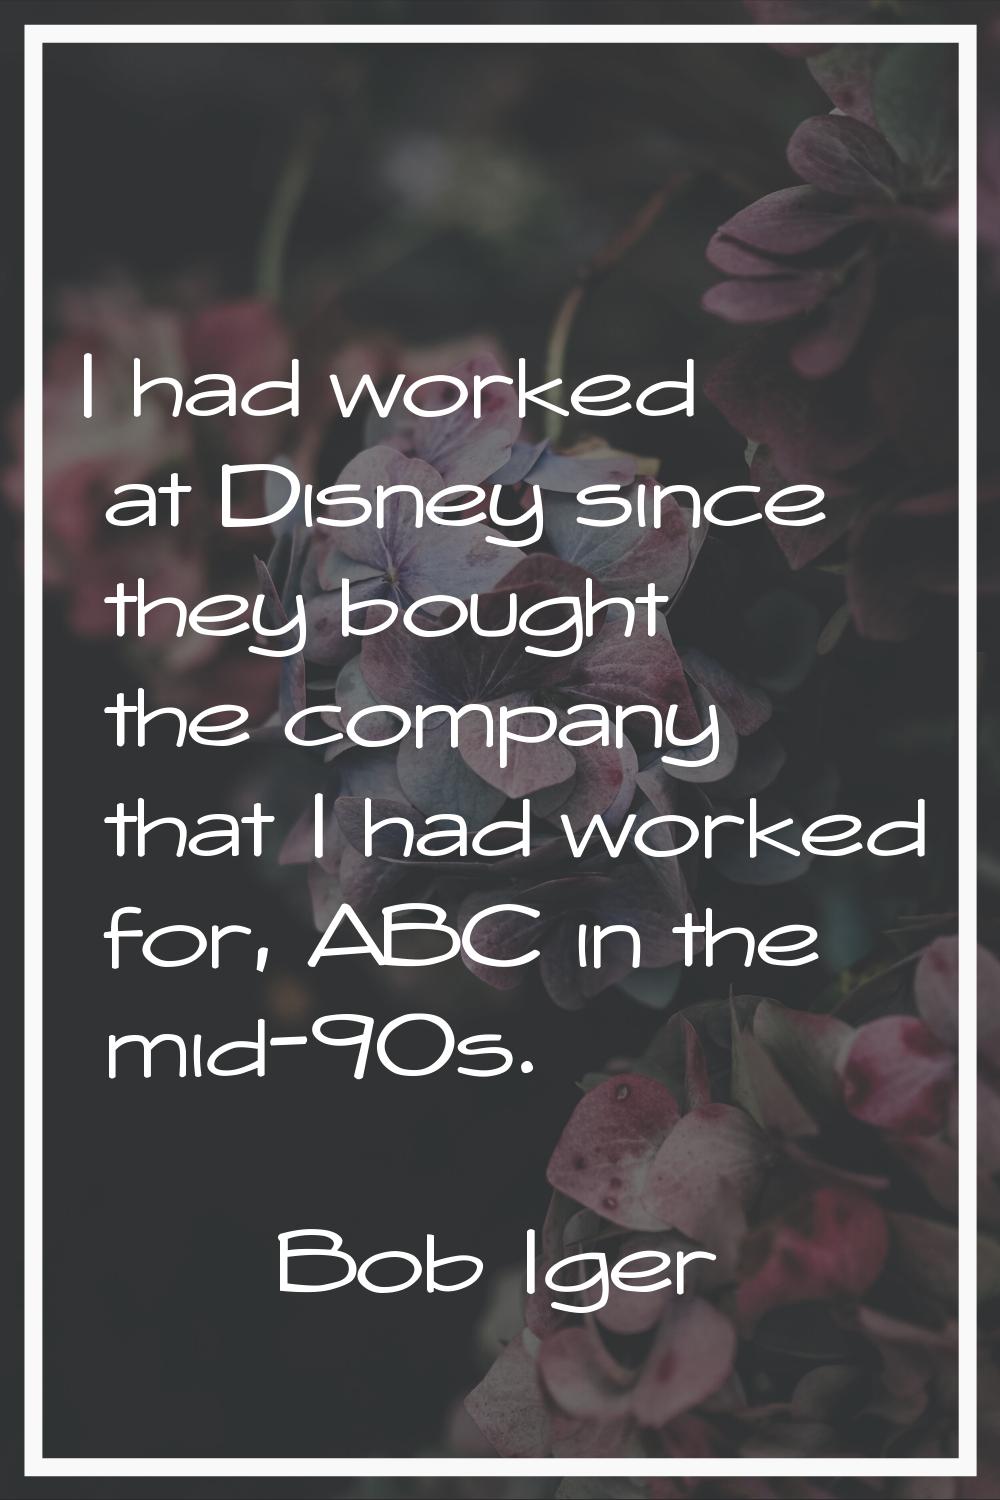 I had worked at Disney since they bought the company that I had worked for, ABC in the mid-90s.